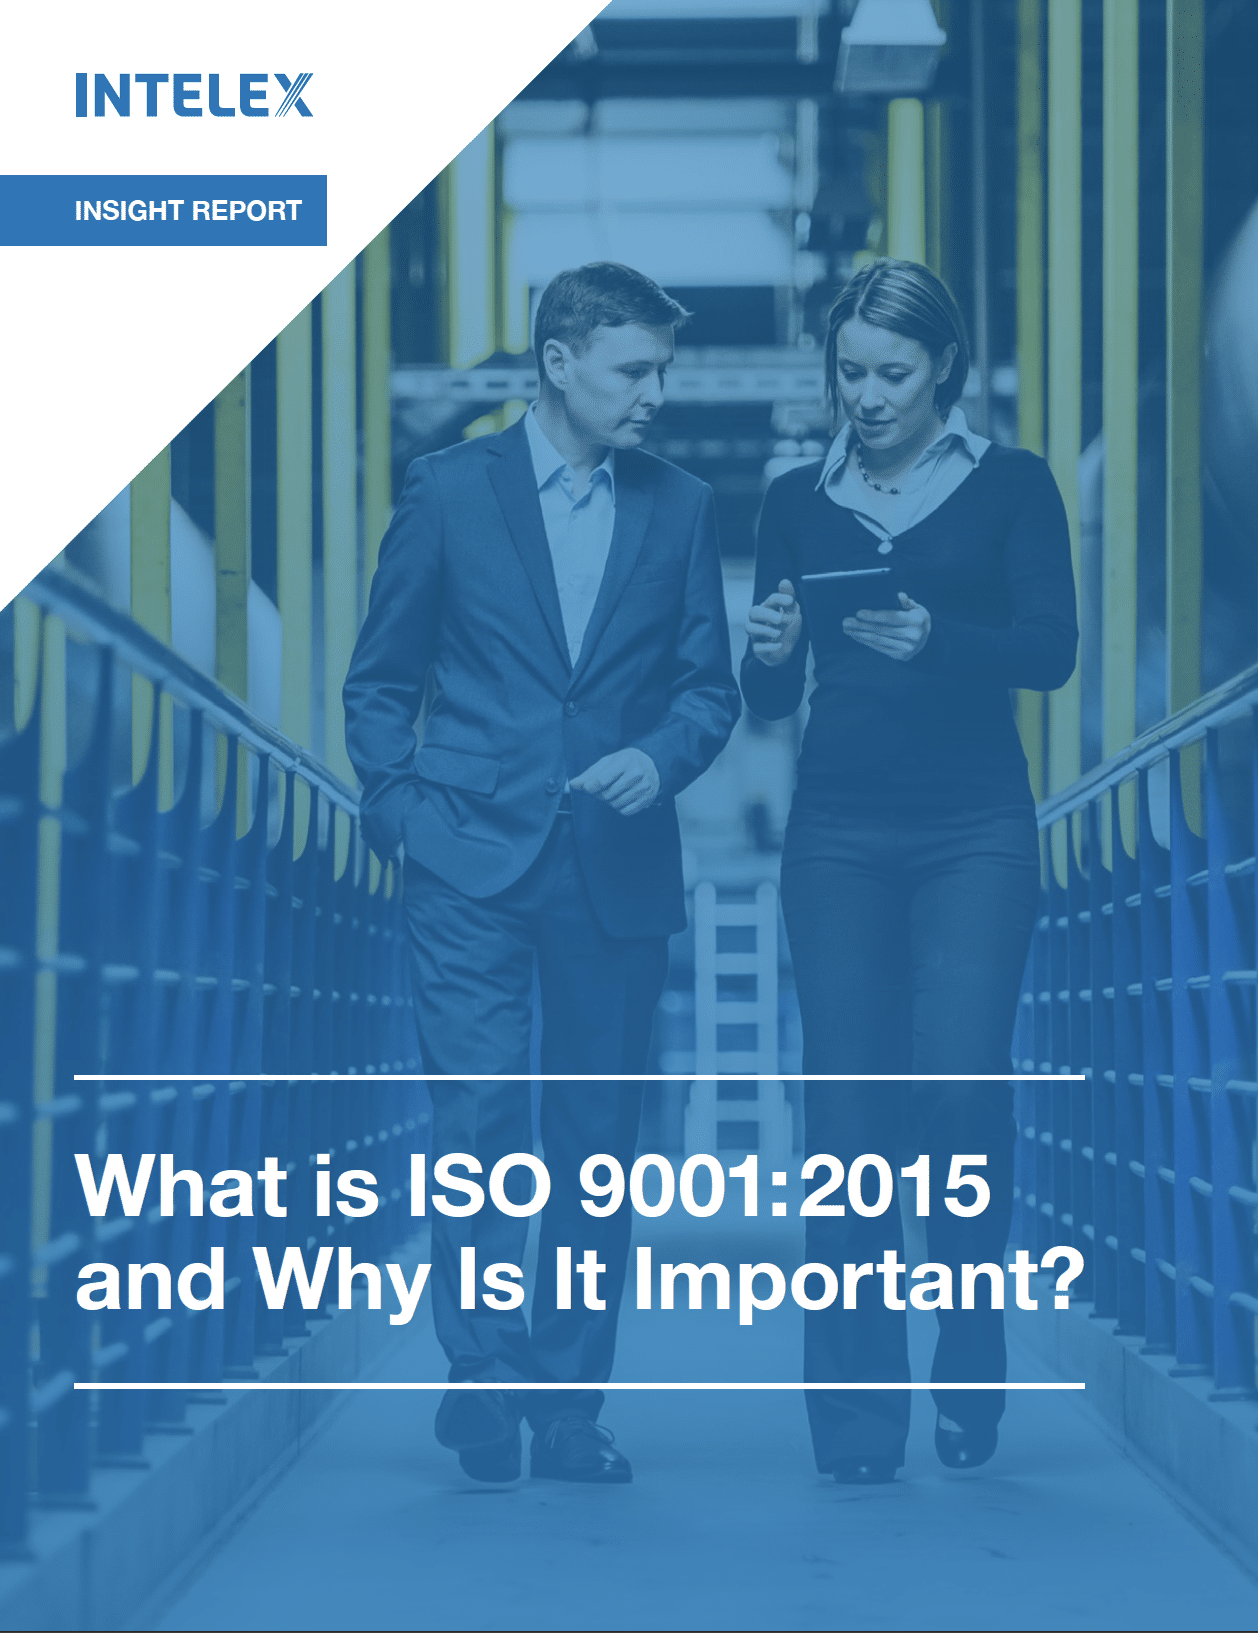 What is ISO 9001:2015